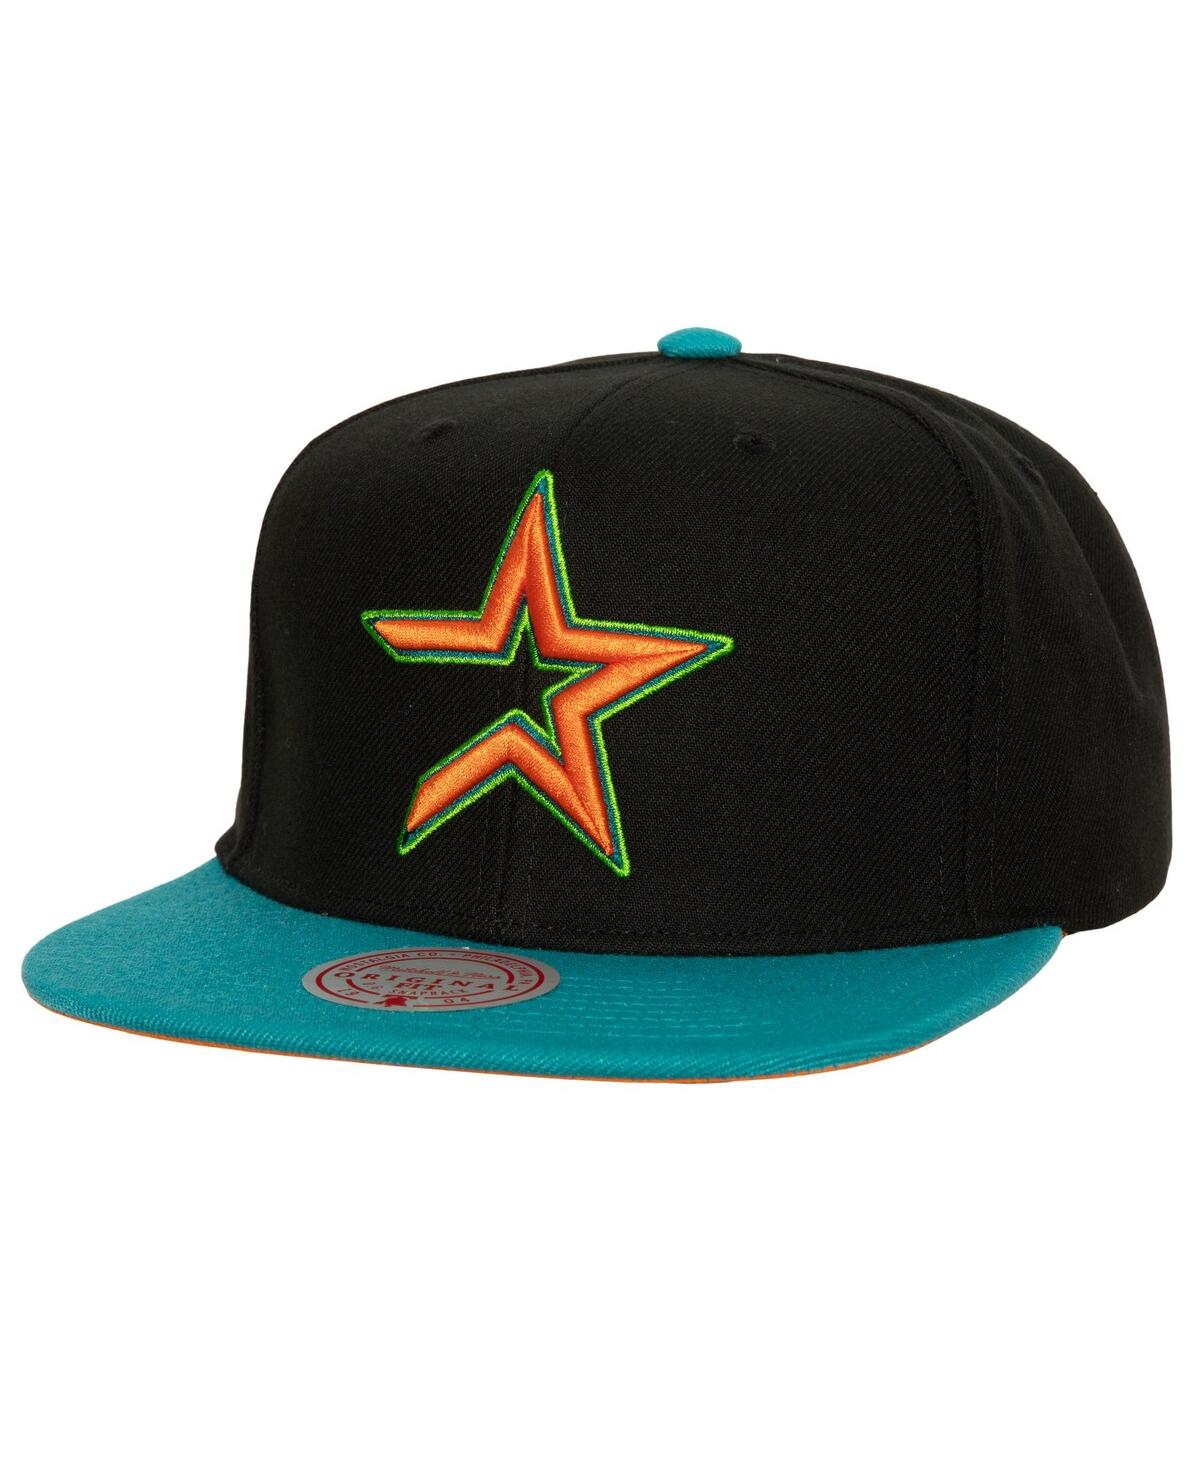 Lids Mitchell & Ness Men's Houston Astros Cooperstown Collection